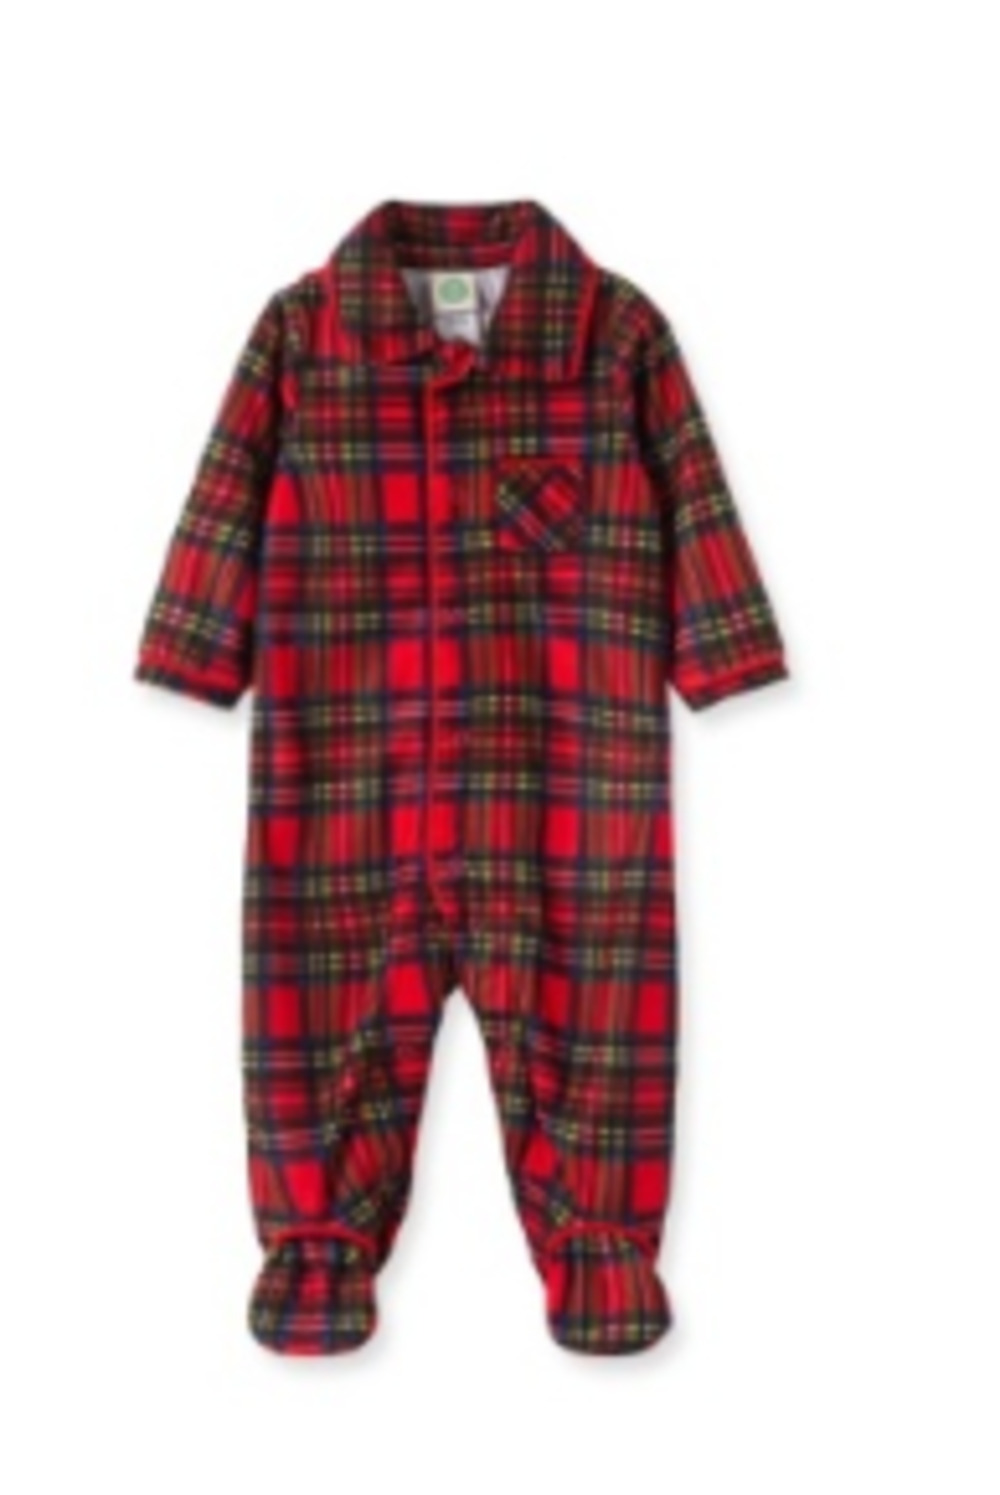 LITTLE ME LS613497/LS607542/LS610943 BABY BOYS HOLIDAY PLAID FOOTIE